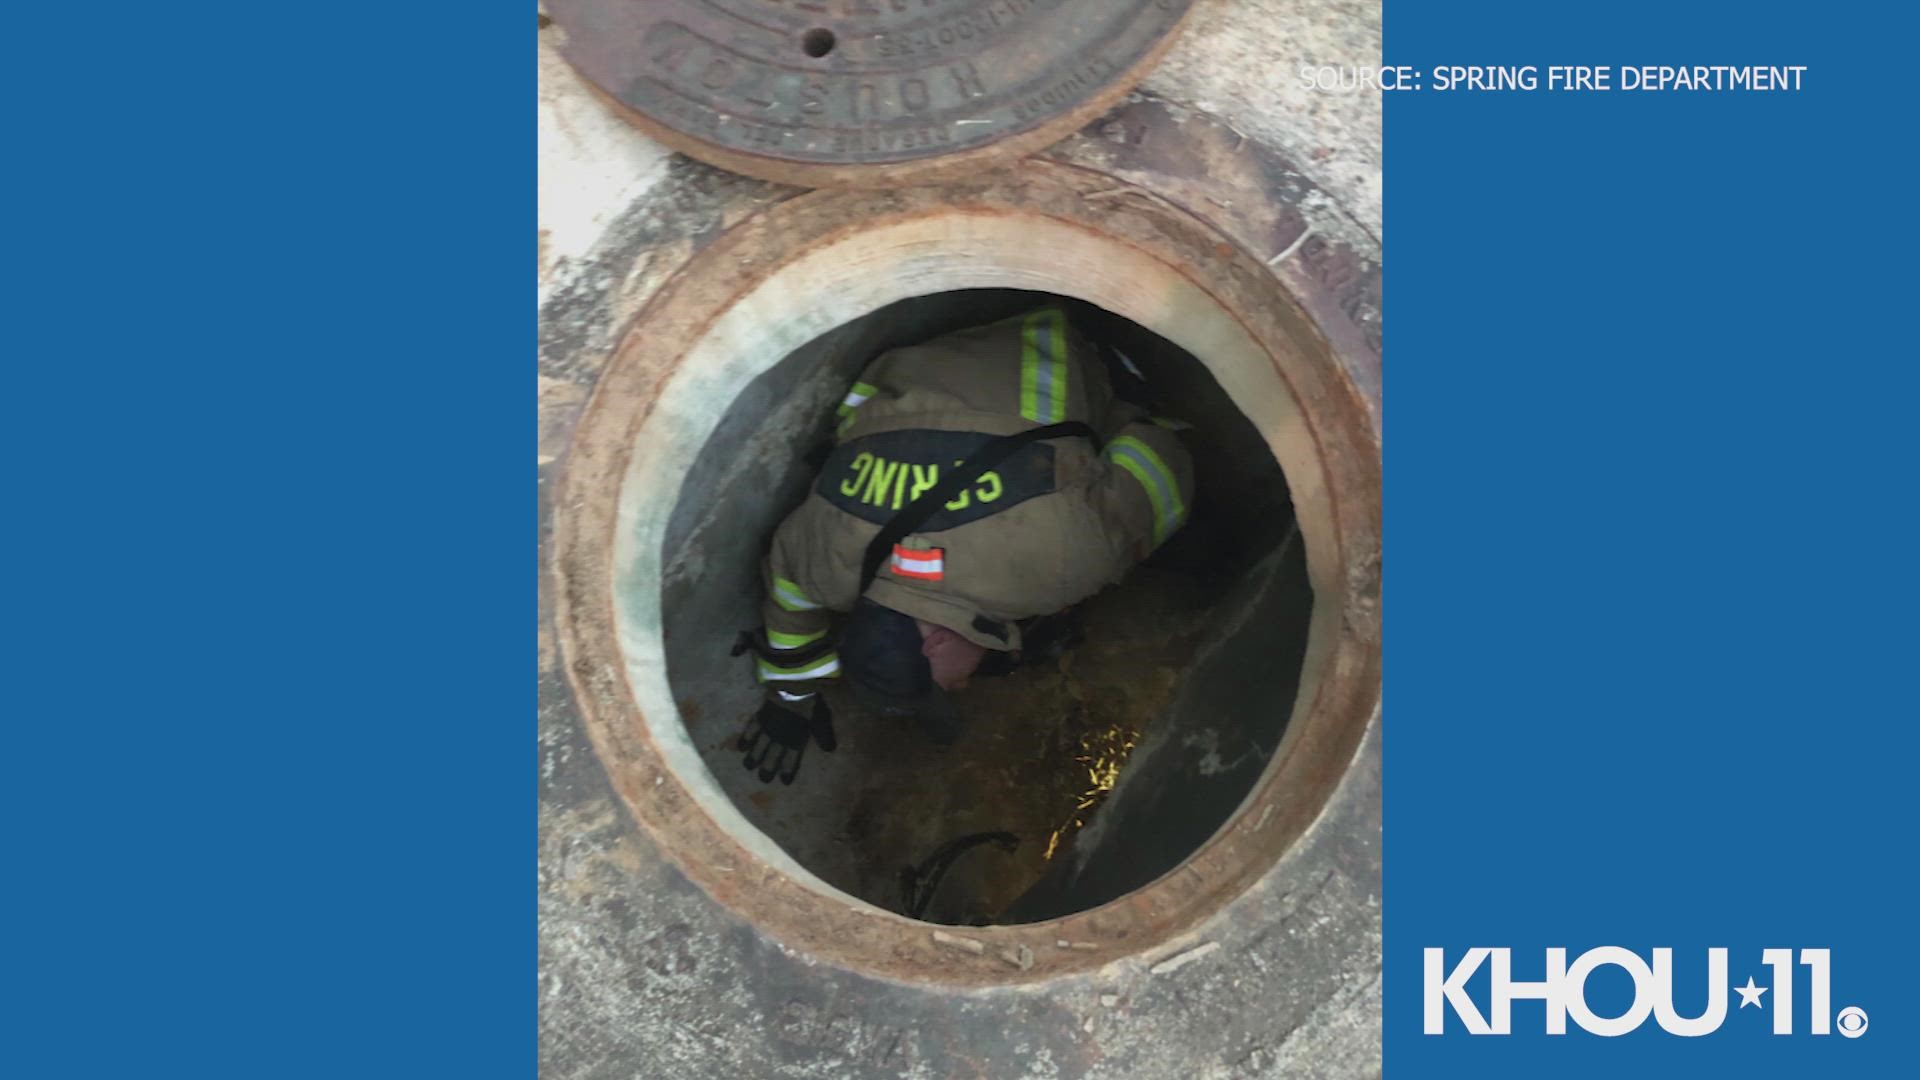 After multiple attempts, Spring firefighters were able to rescue an adorable kitten that found itself trapped in the sewer. They shared these photos.